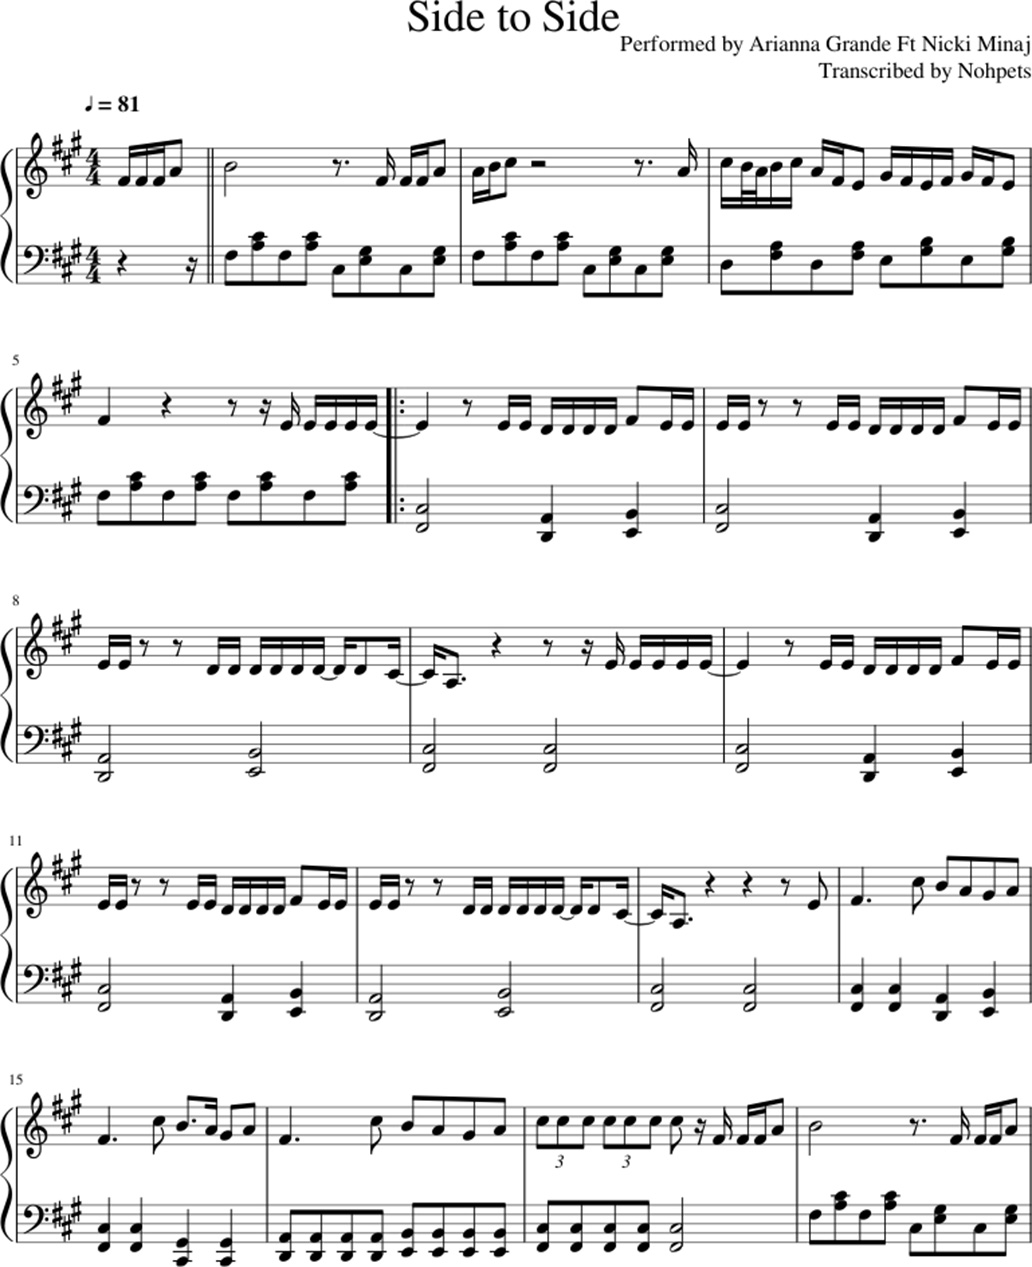 Side to side sheet music notes 1